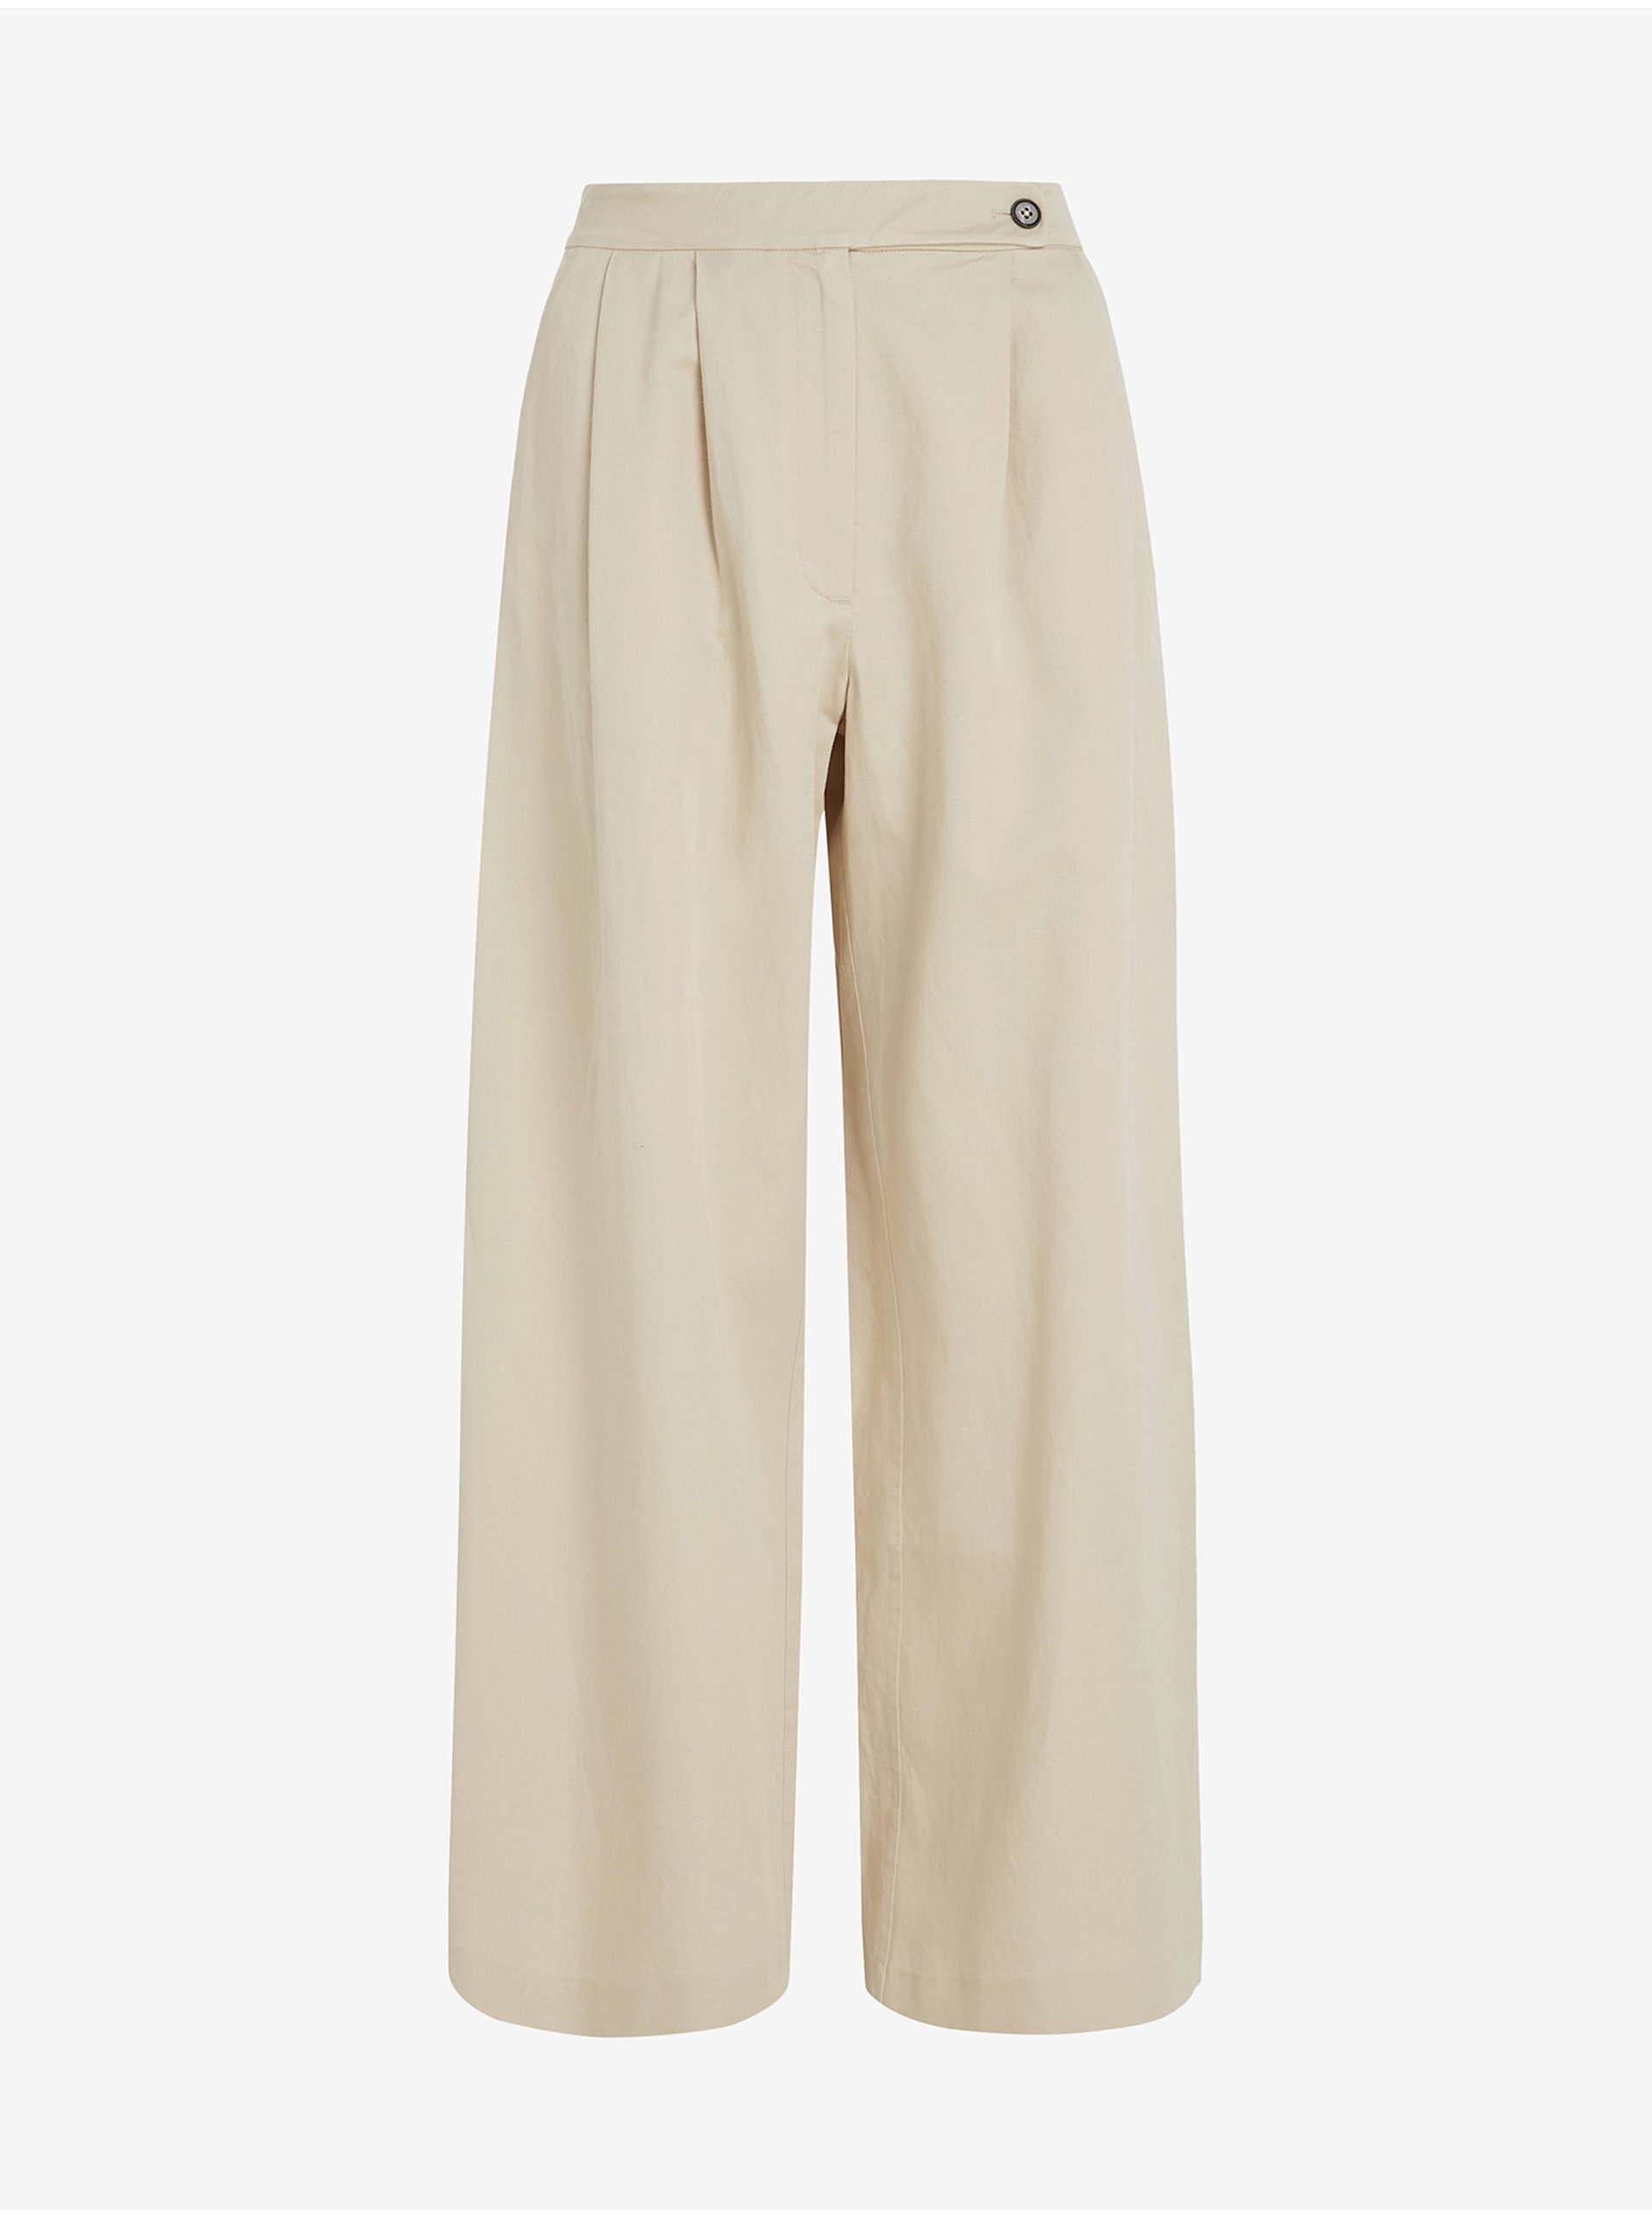 Beige women's wide trousers with linen Tommy Hilfiger - Ladies